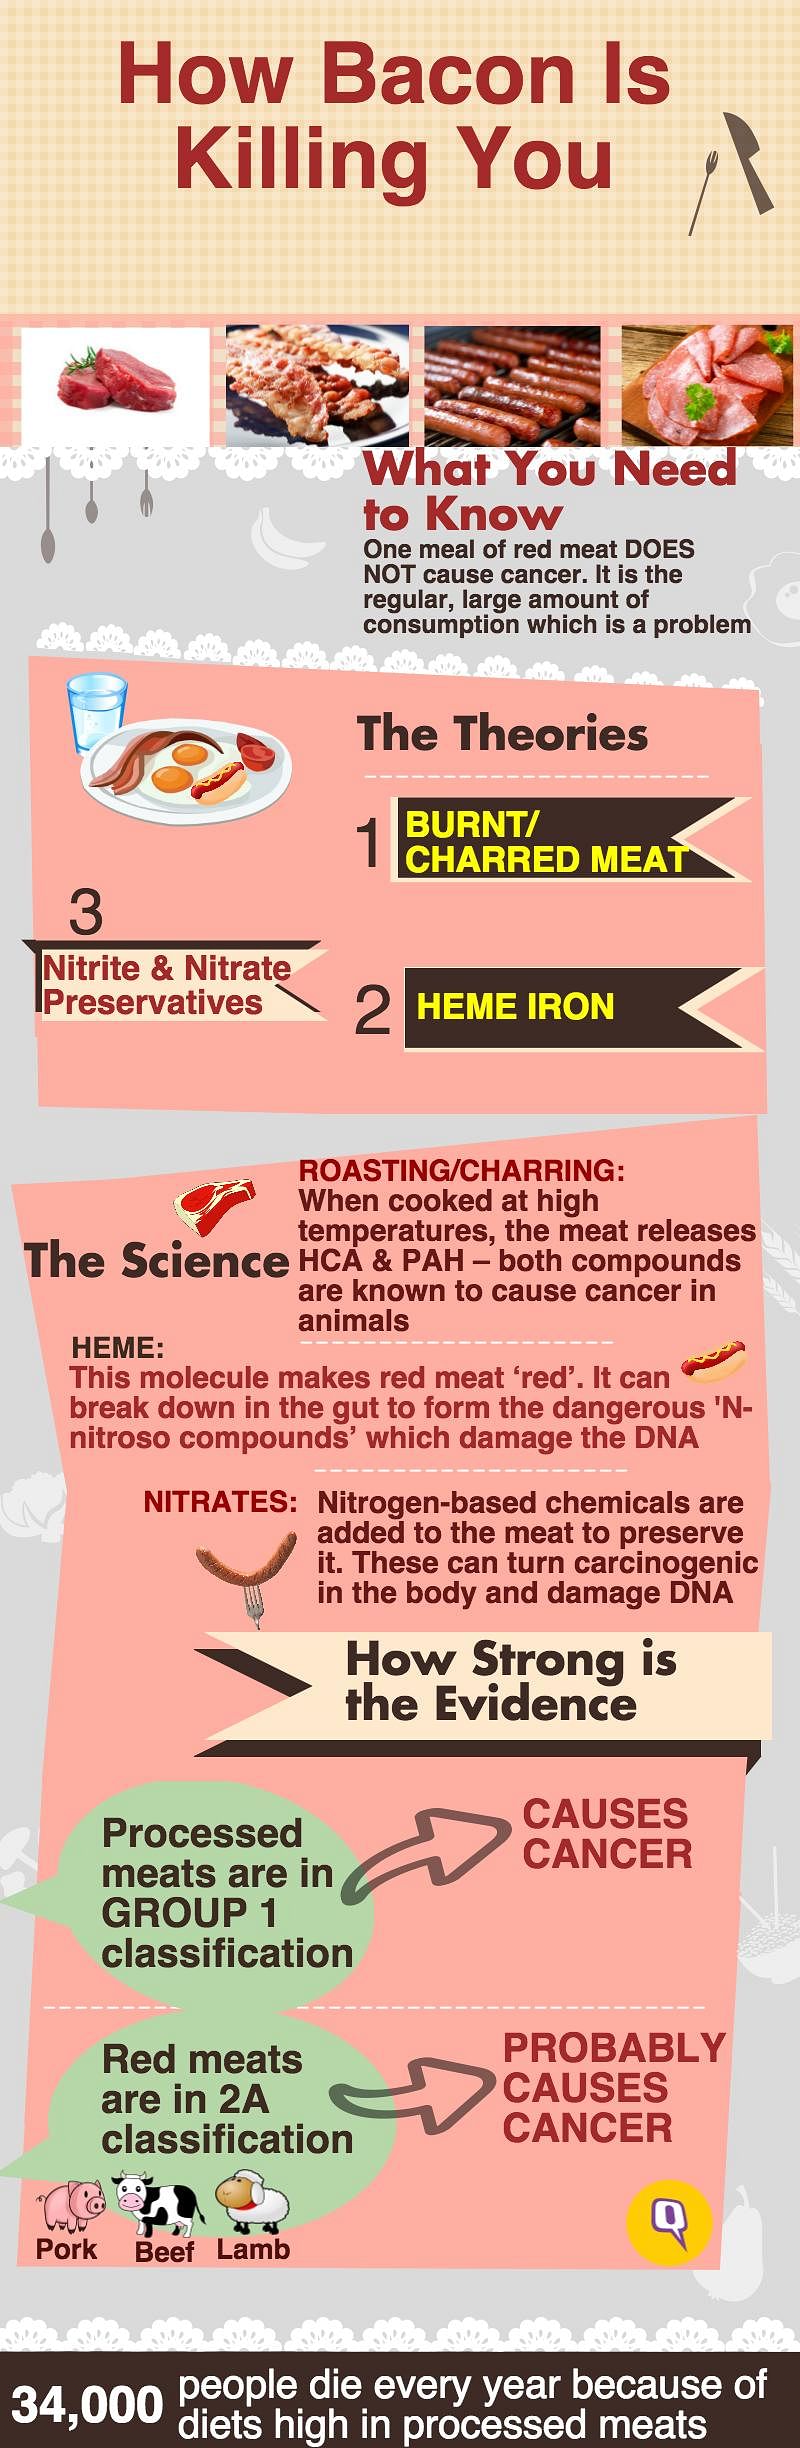 The science behind how bacon can kill